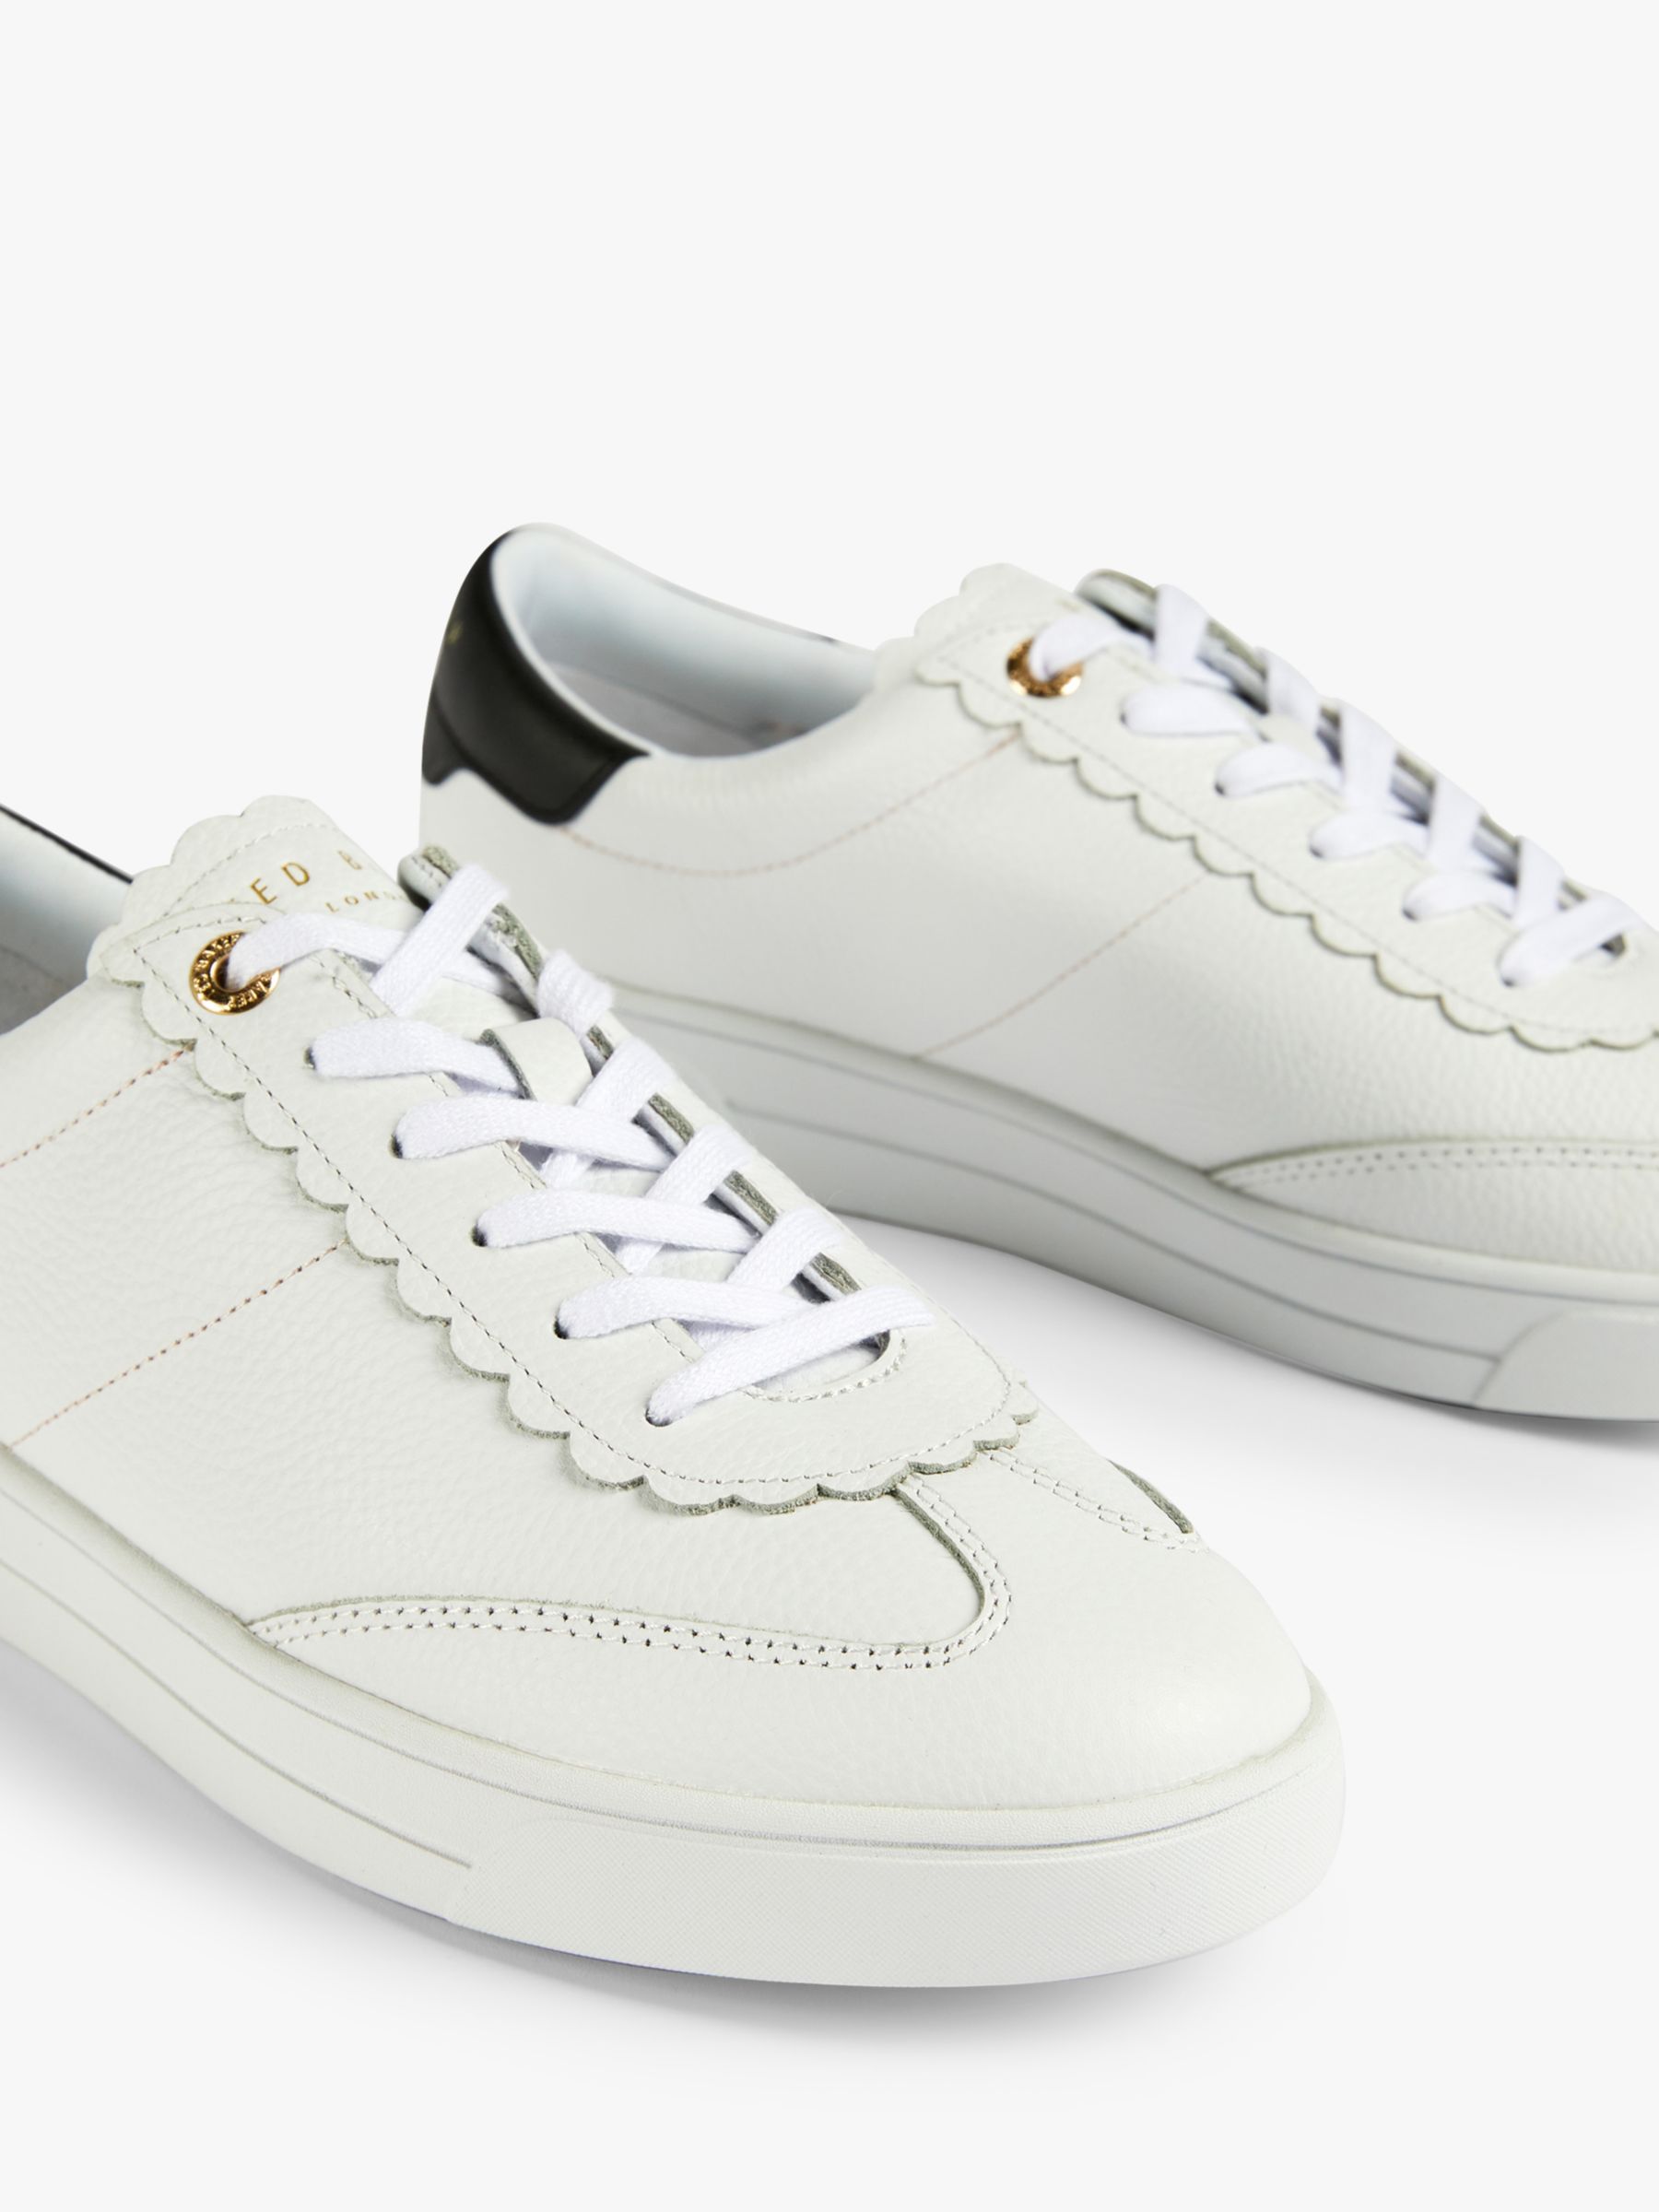 Ted Baker Ebby Leather Lace Up Trainers, White/Black at John Lewis ...